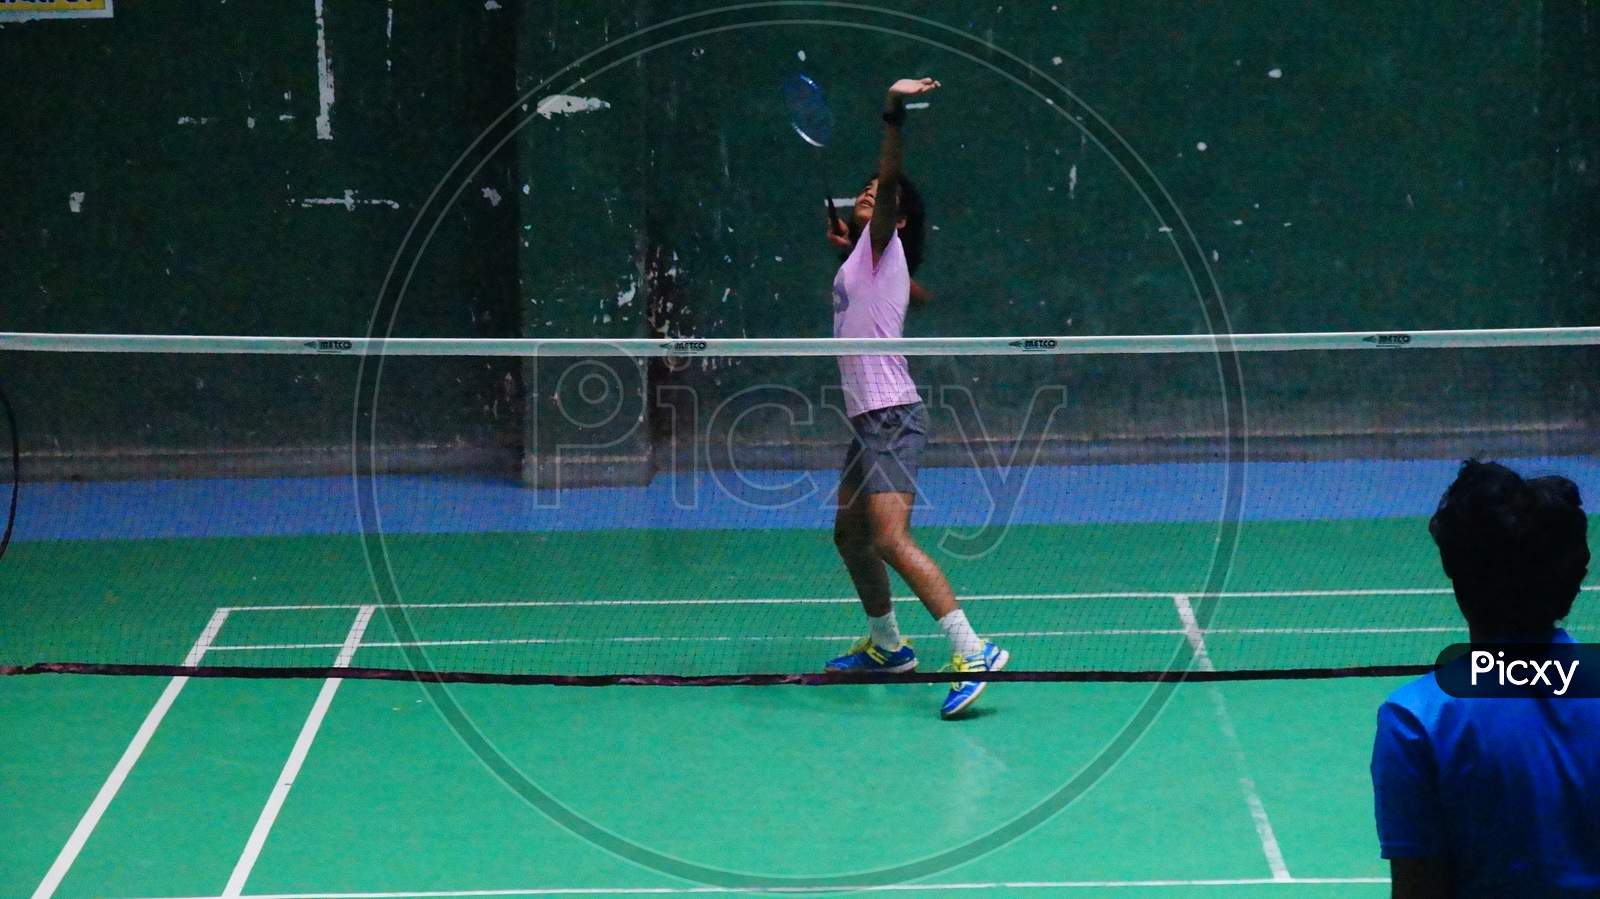 Image of Badminton Stance made before sitting Badminton Strike - Toss while doing practice